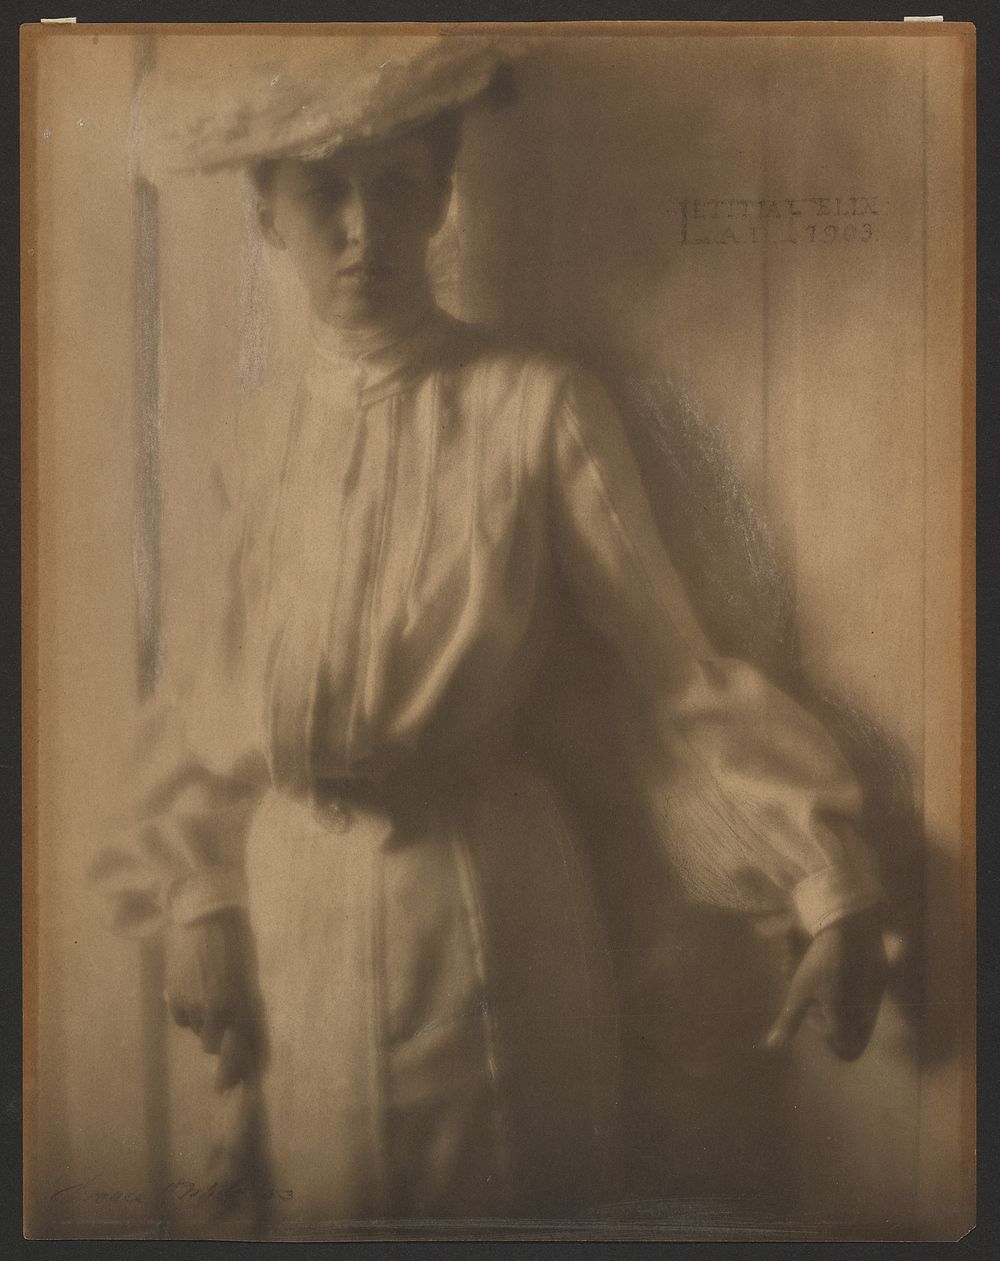 Letitia Felix by Clarence H White